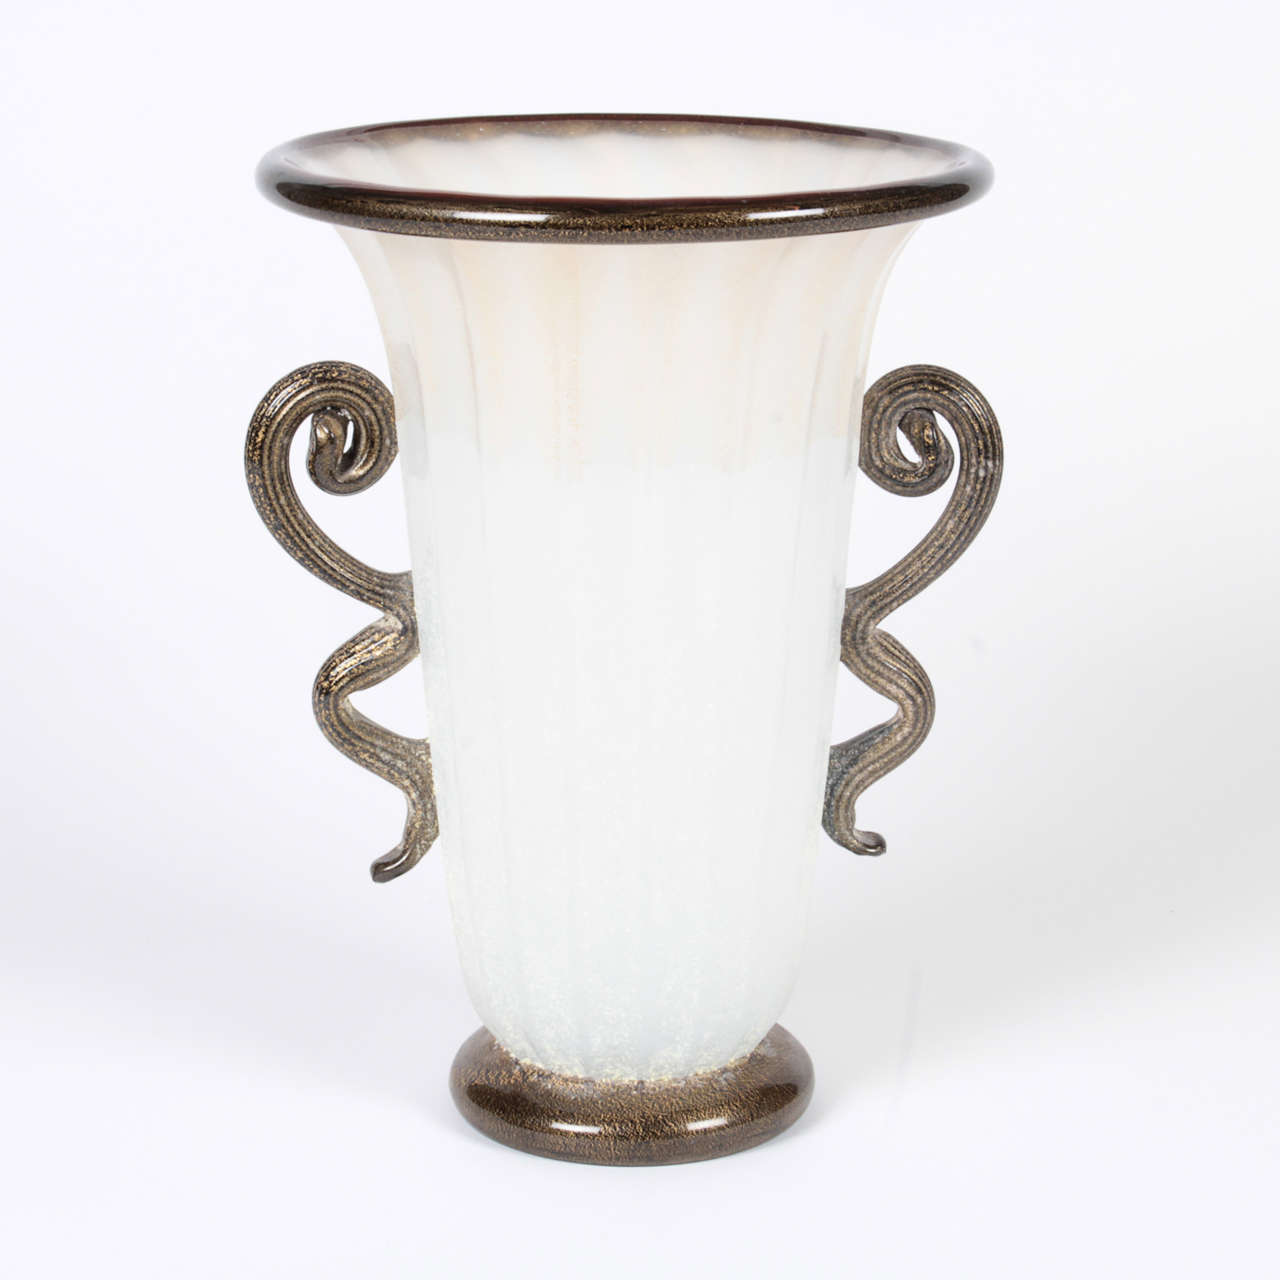 Vintage Murano opalescent vase created in Grecian style. Decorative details provide a striking contrast to the subtle opalescent shade of the vase.